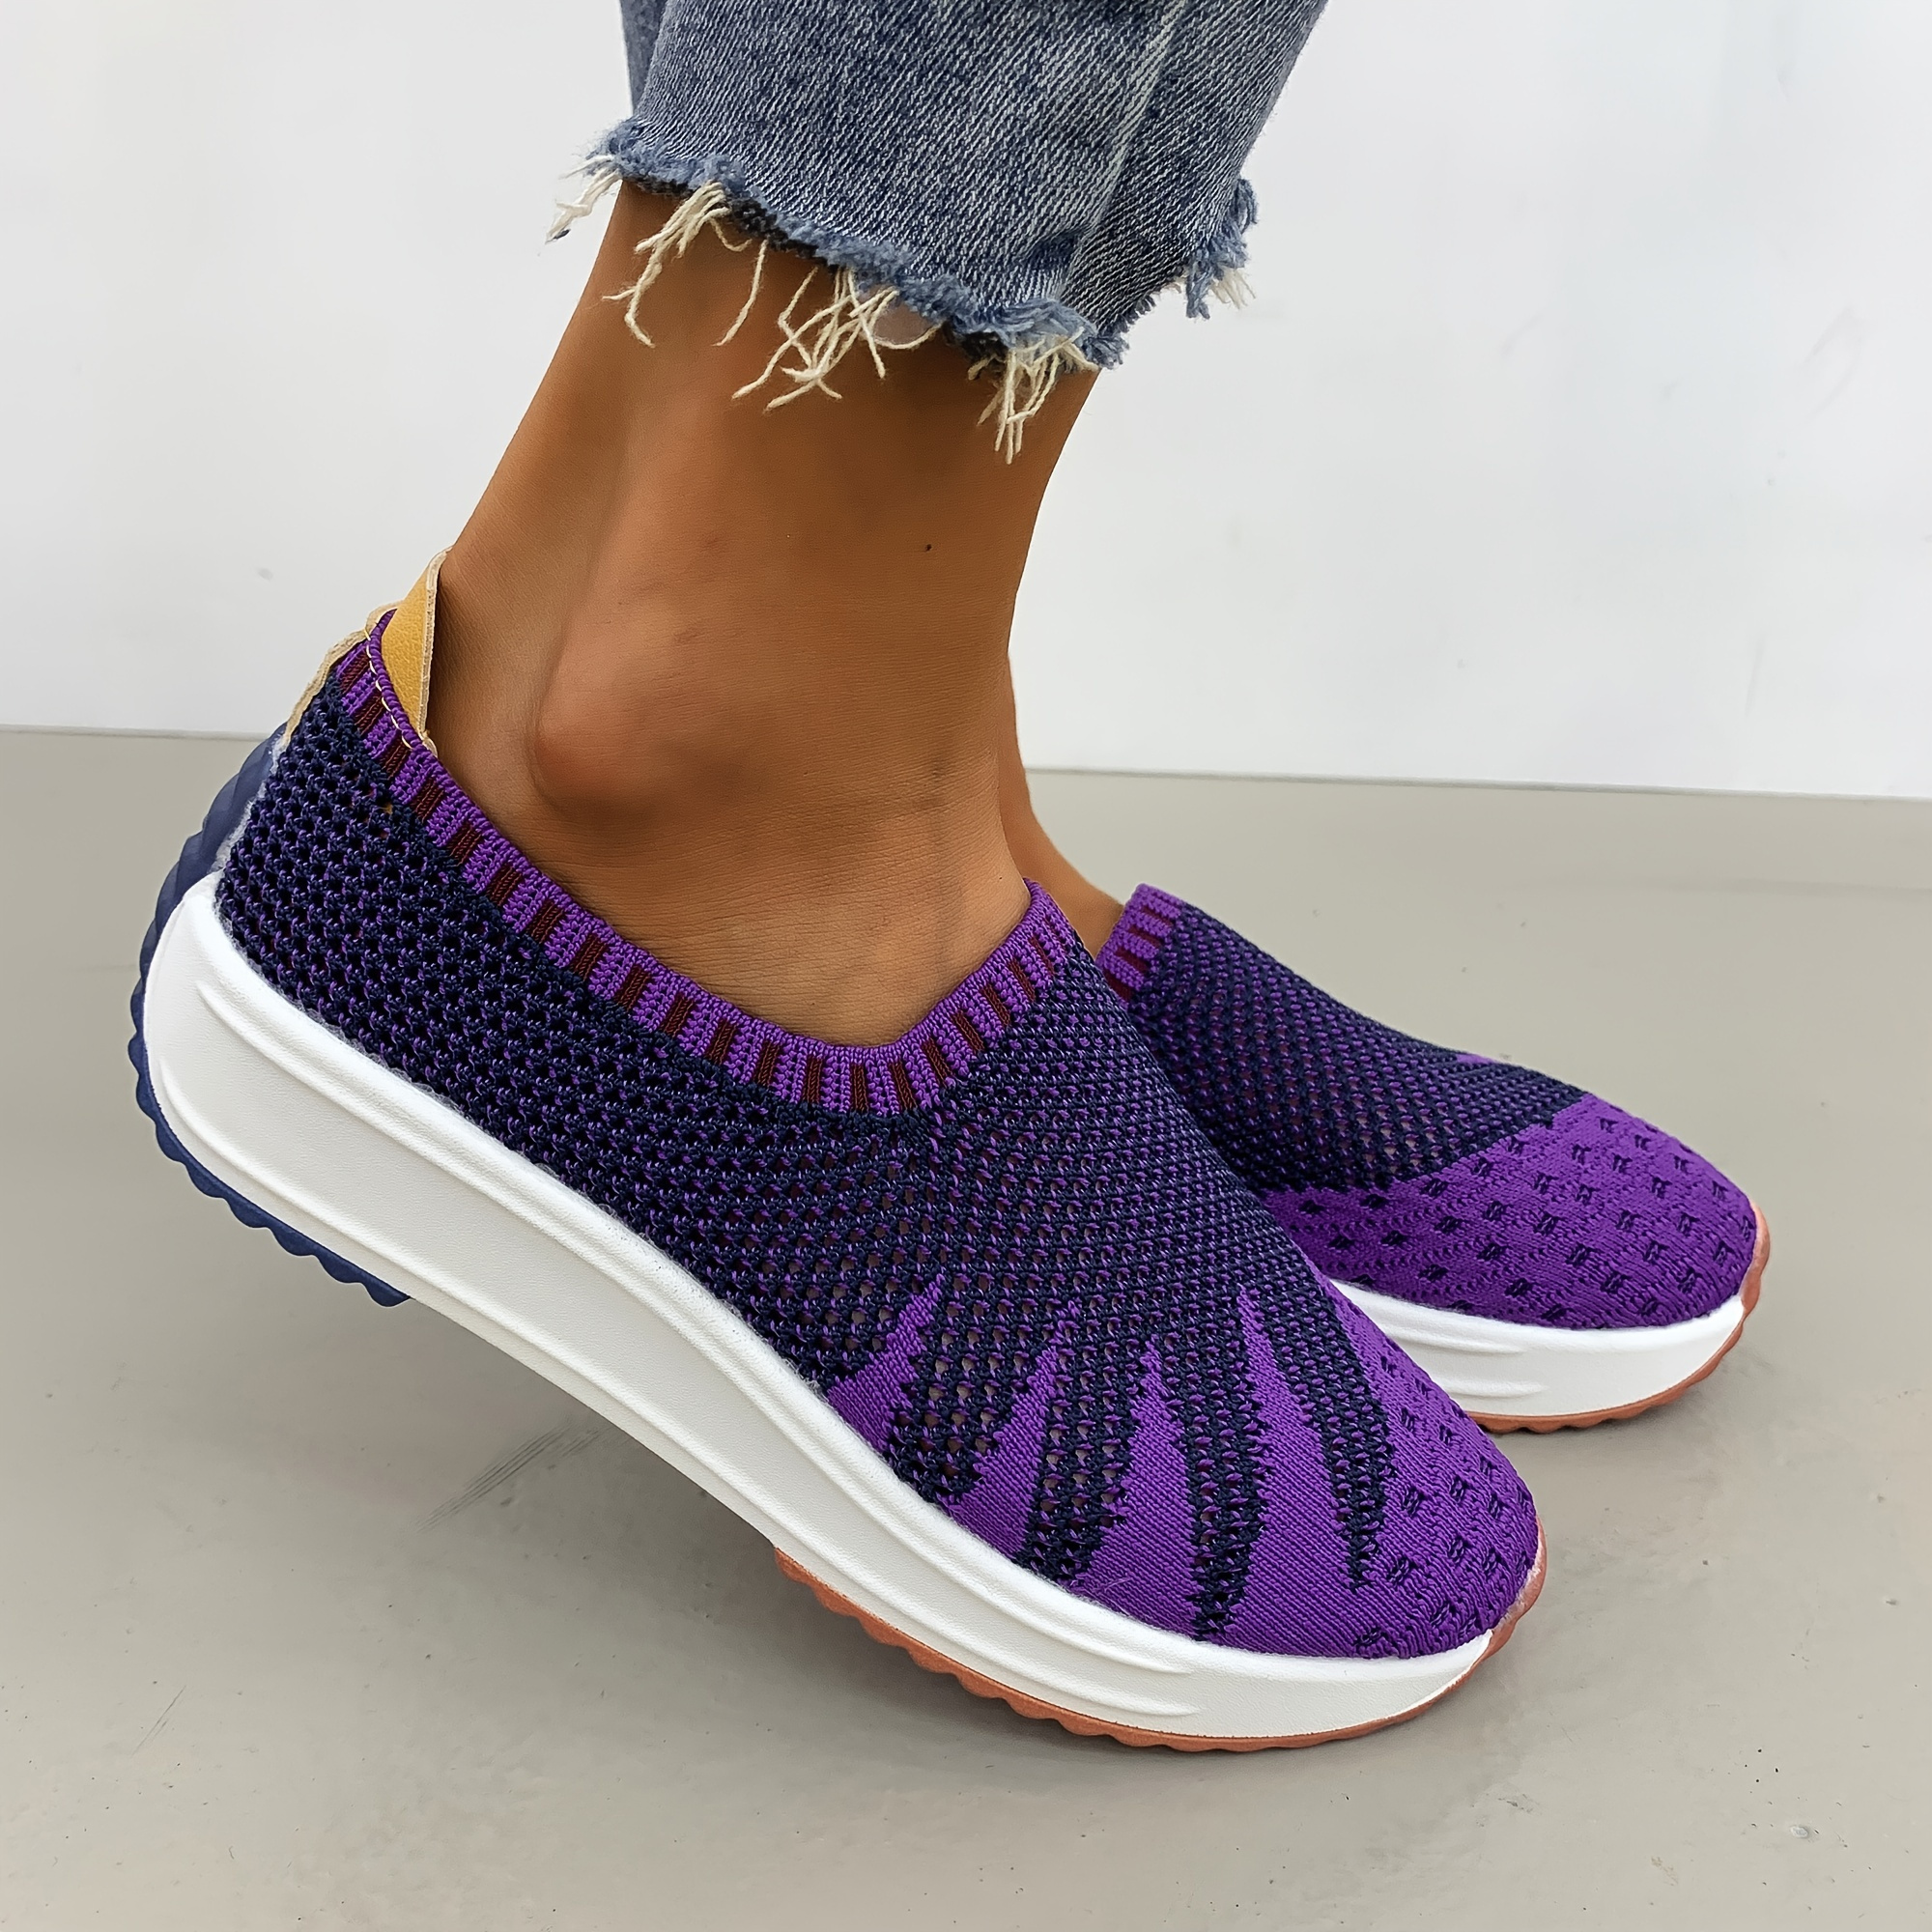 Womens Flying Woven Breathable Sports Shoes Lightweight Slip On Walking Running Shoes 6372